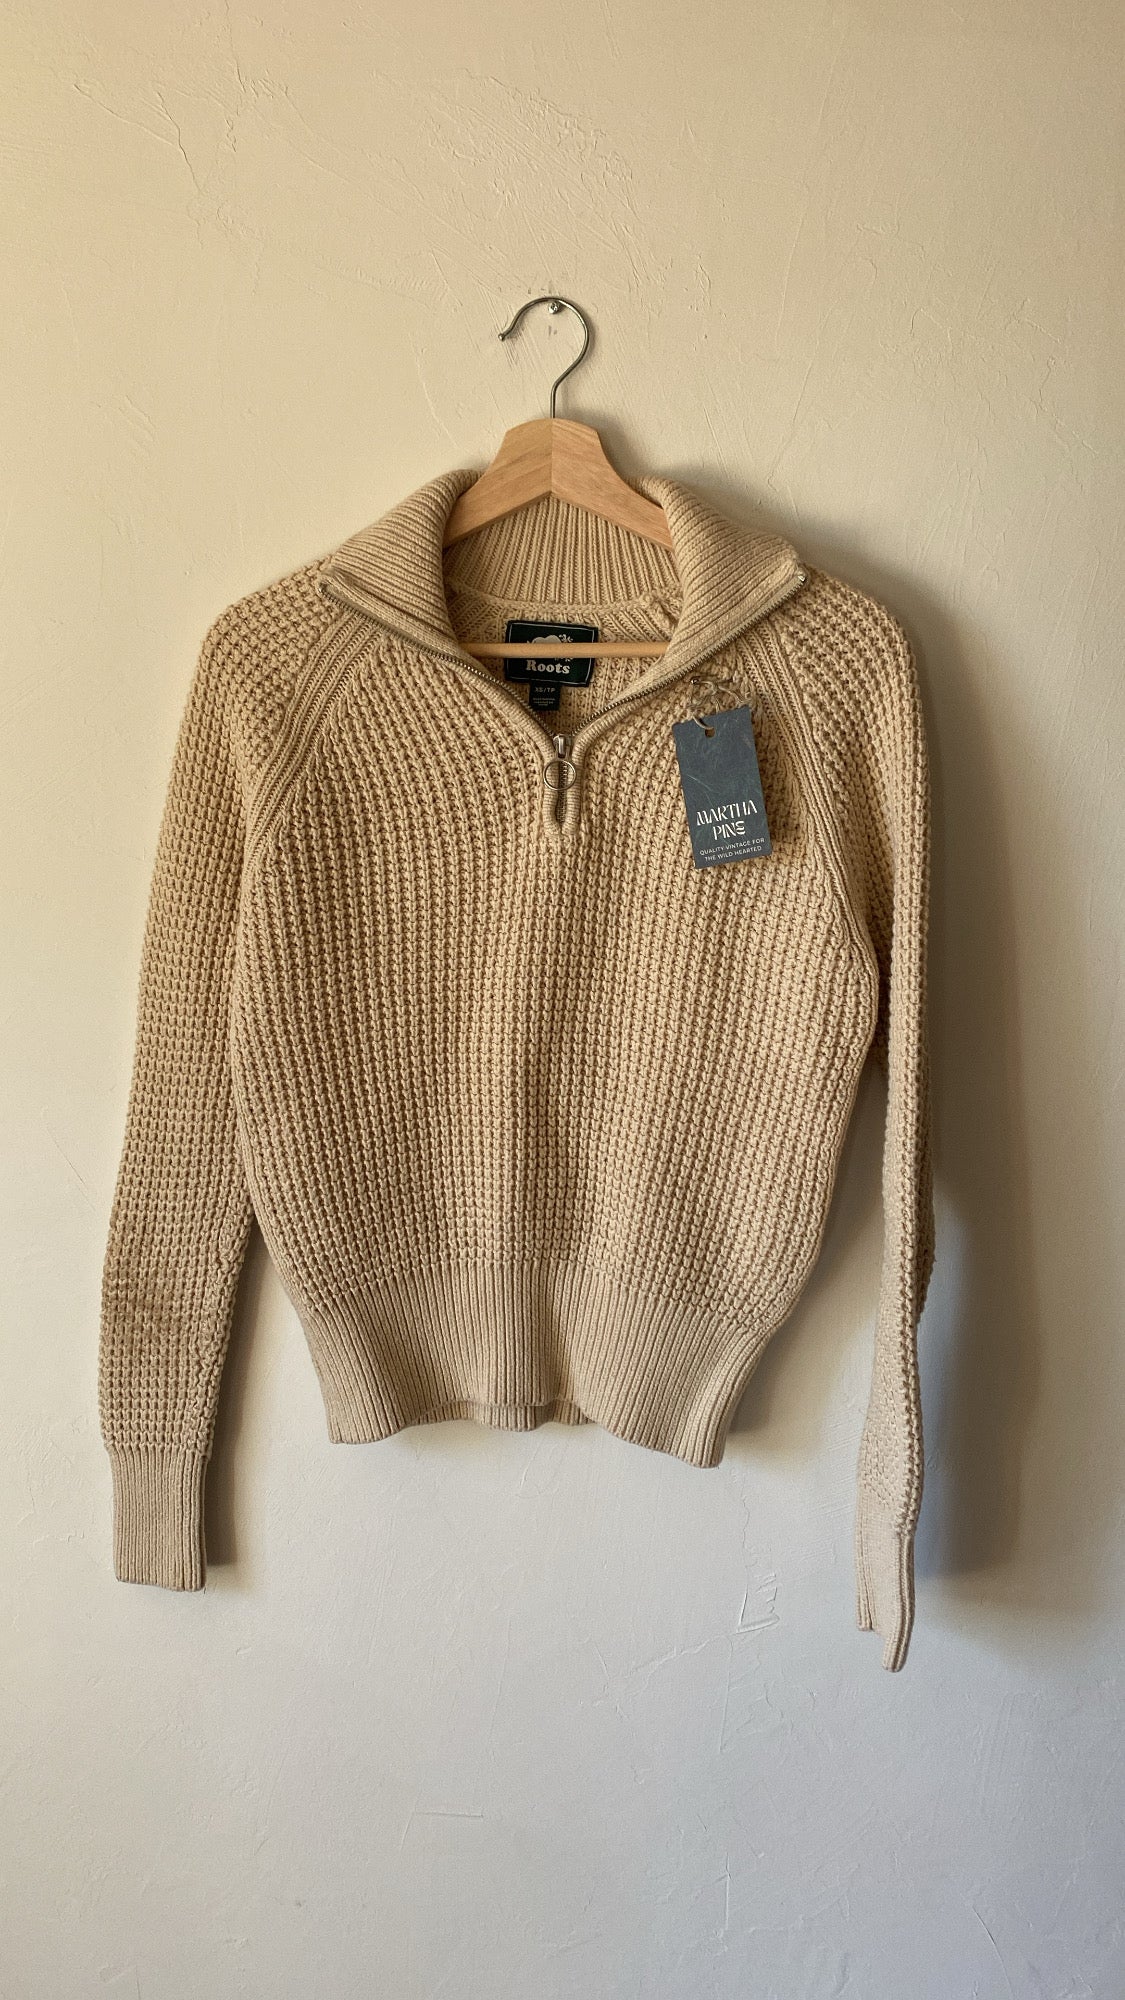 Vintage S117: Roots Wool + Cotton Knit